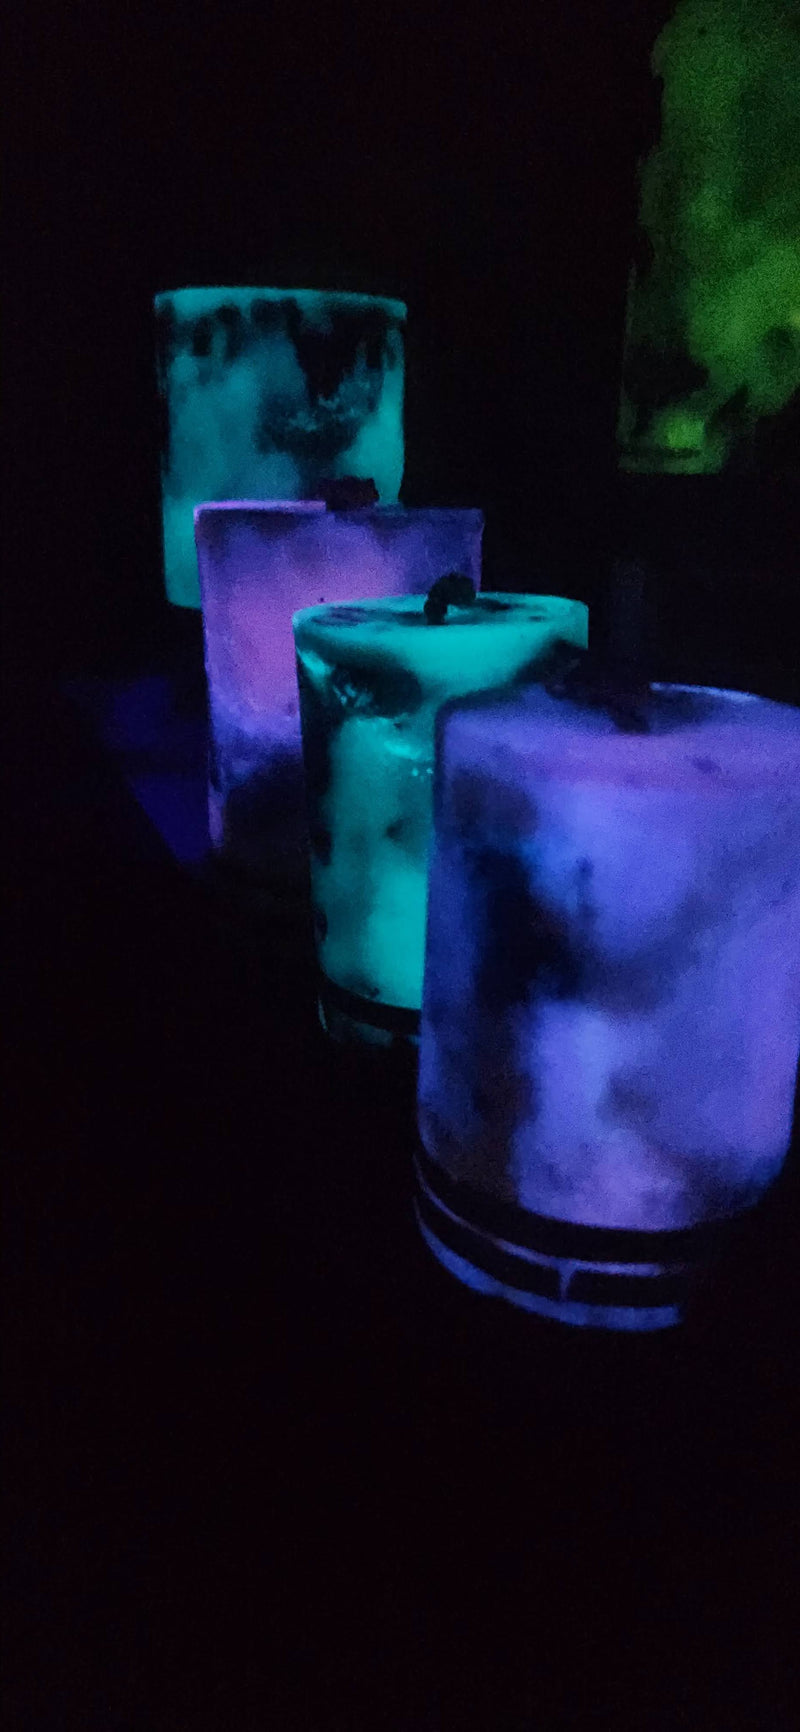 Marbled Cylinder Glowing Beeswax Candles (Set of Four)